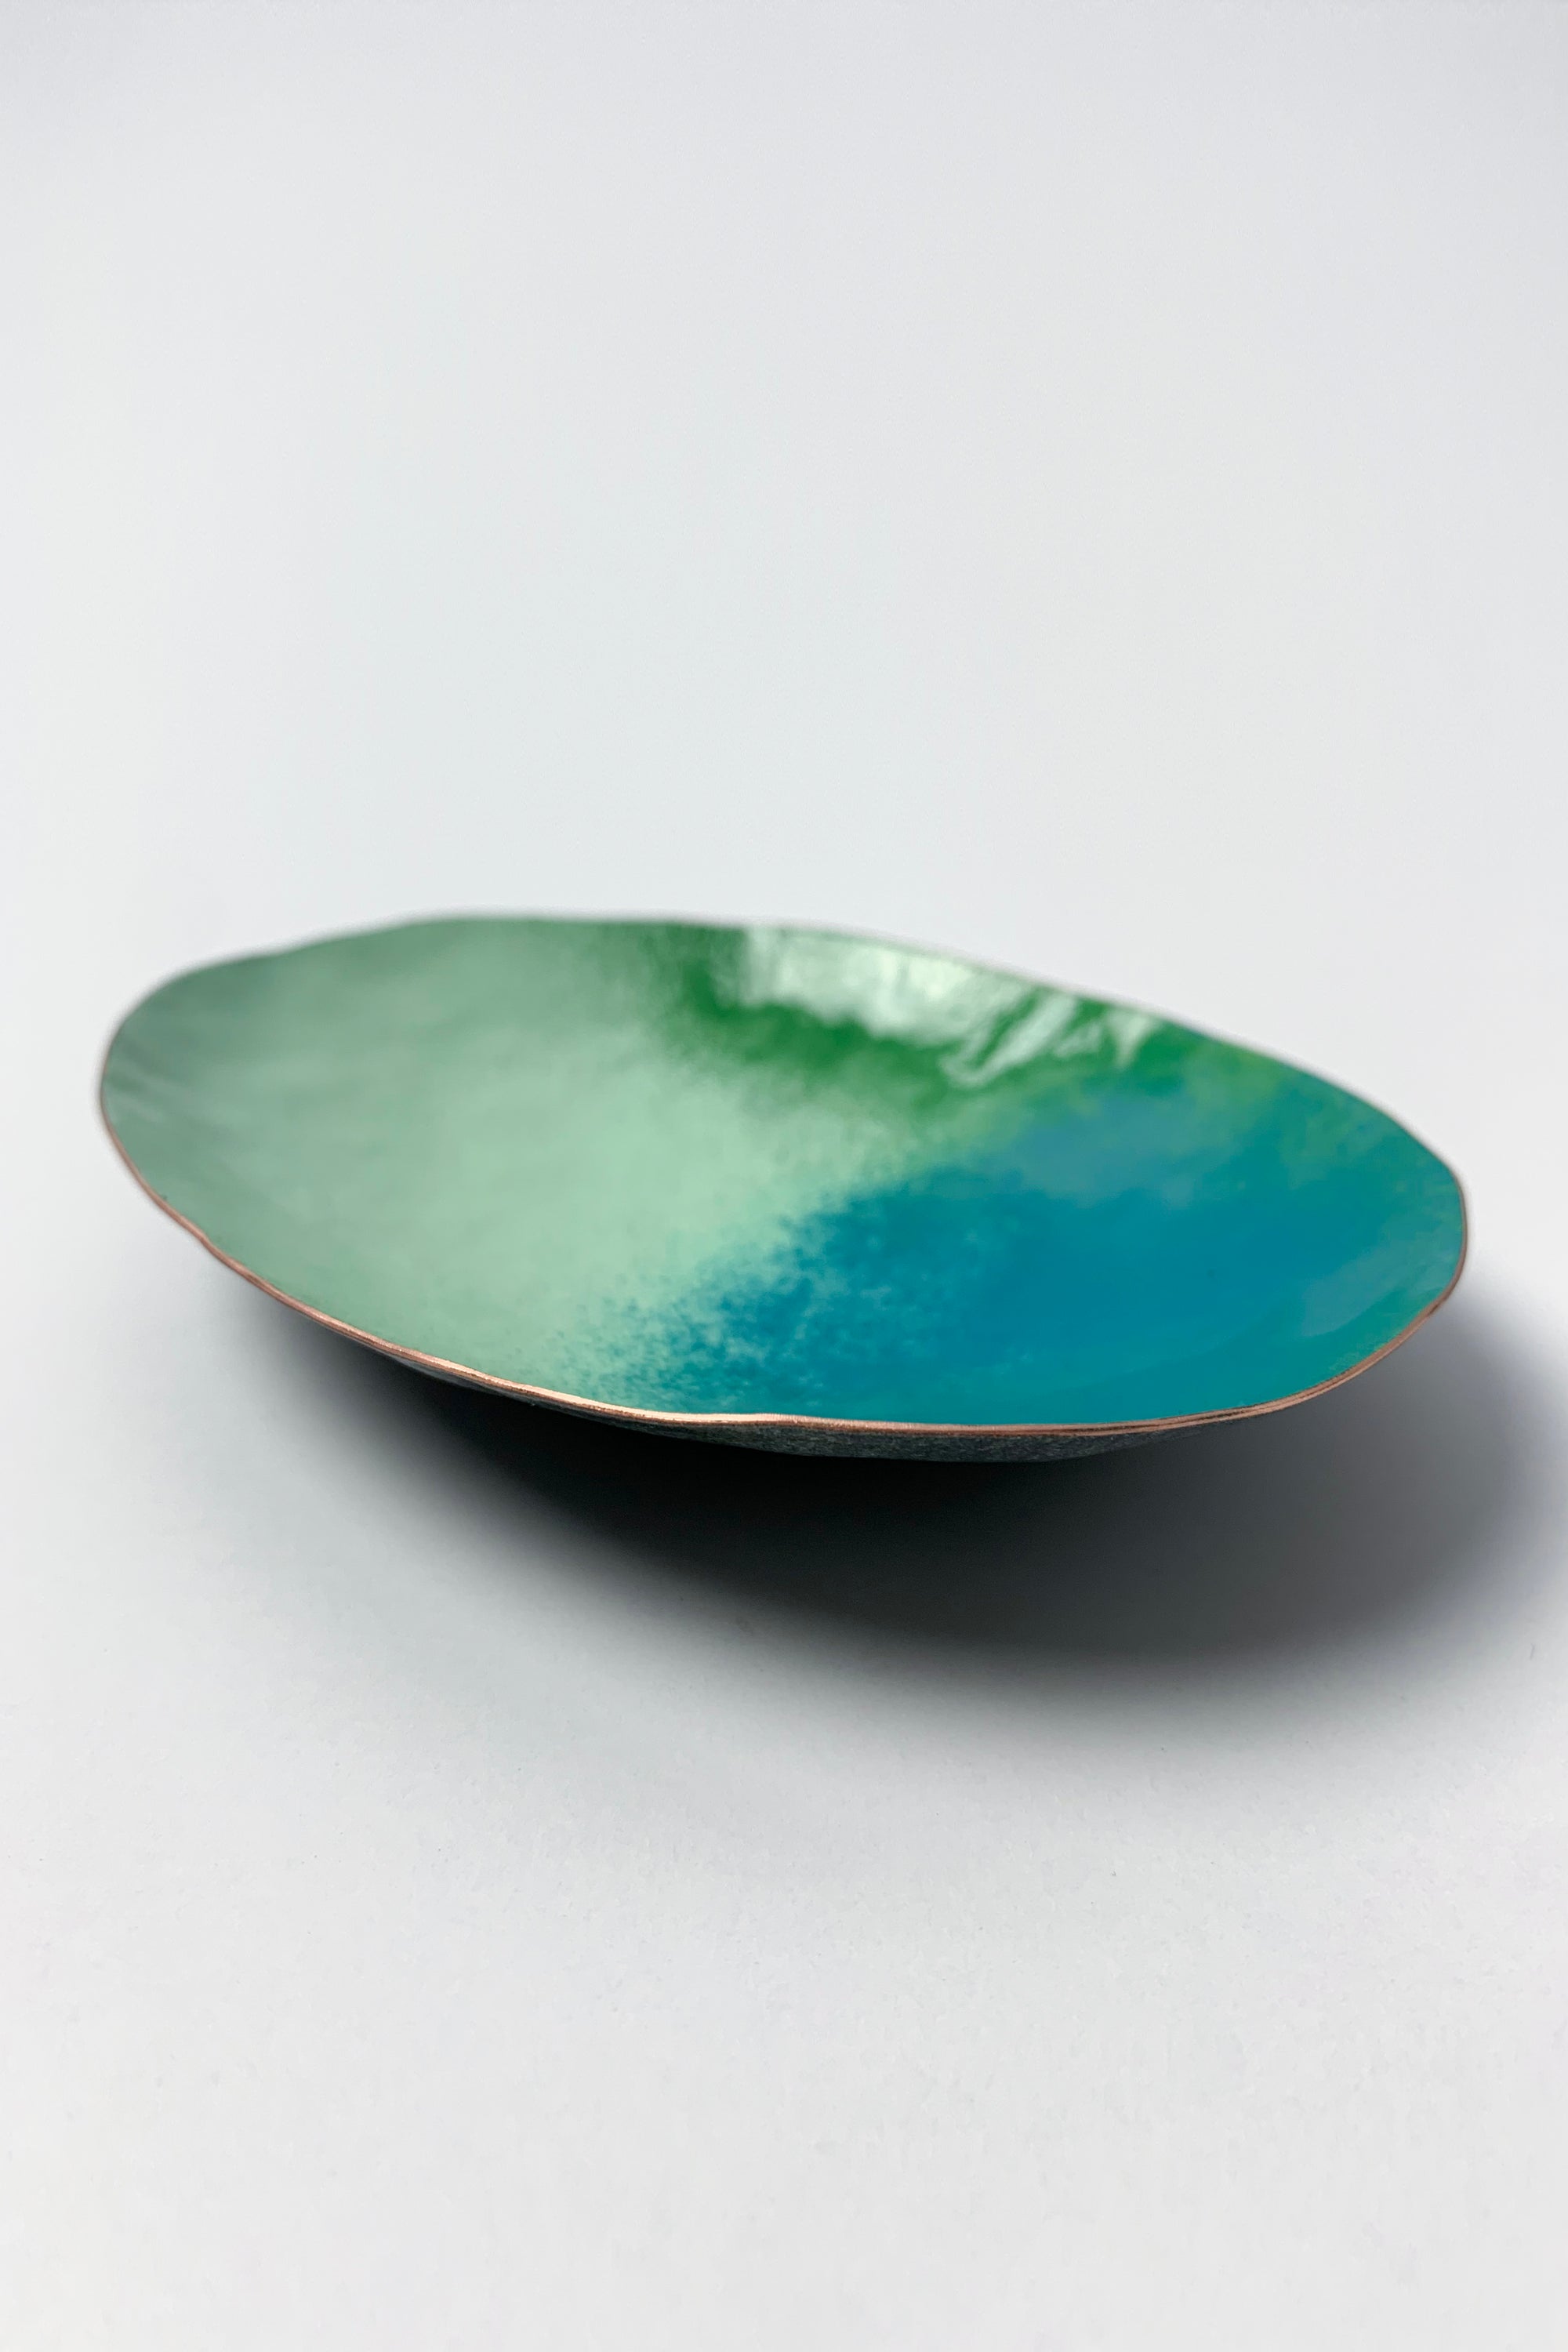 Oval Copper Dish in Mint and Bold Teal